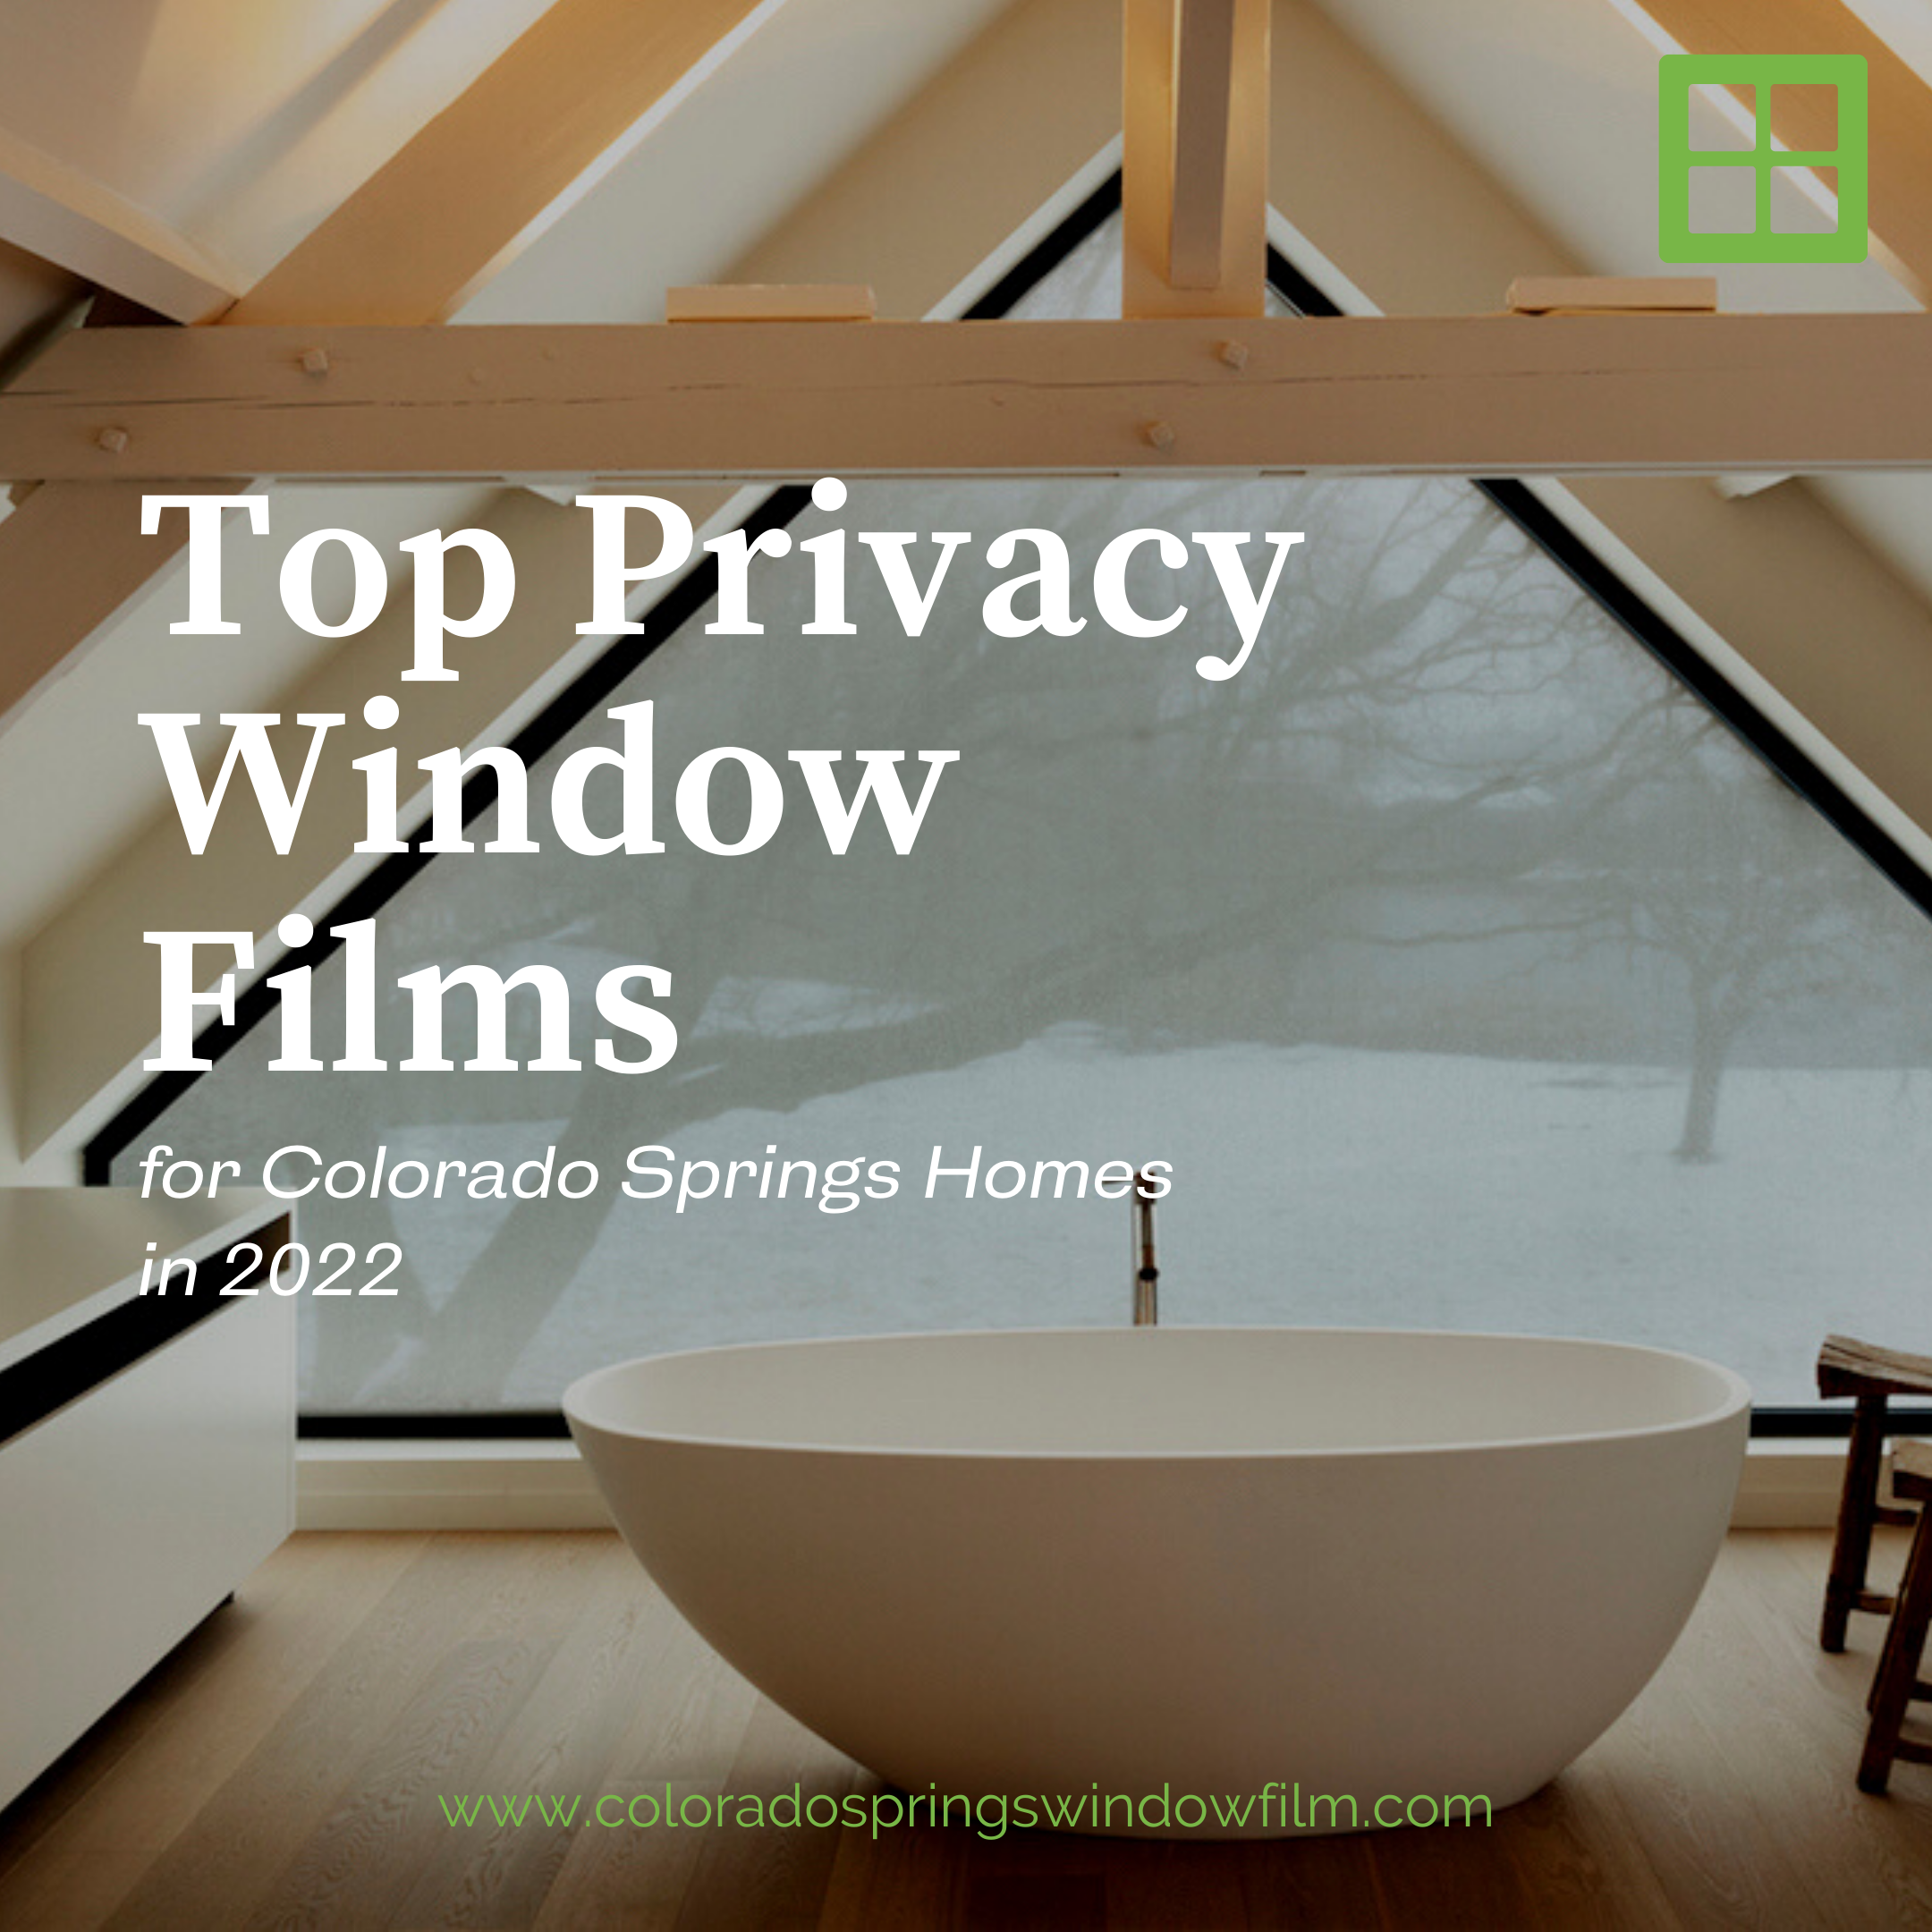 Top Privacy Window Films for Colorado Springs Homes in 2022